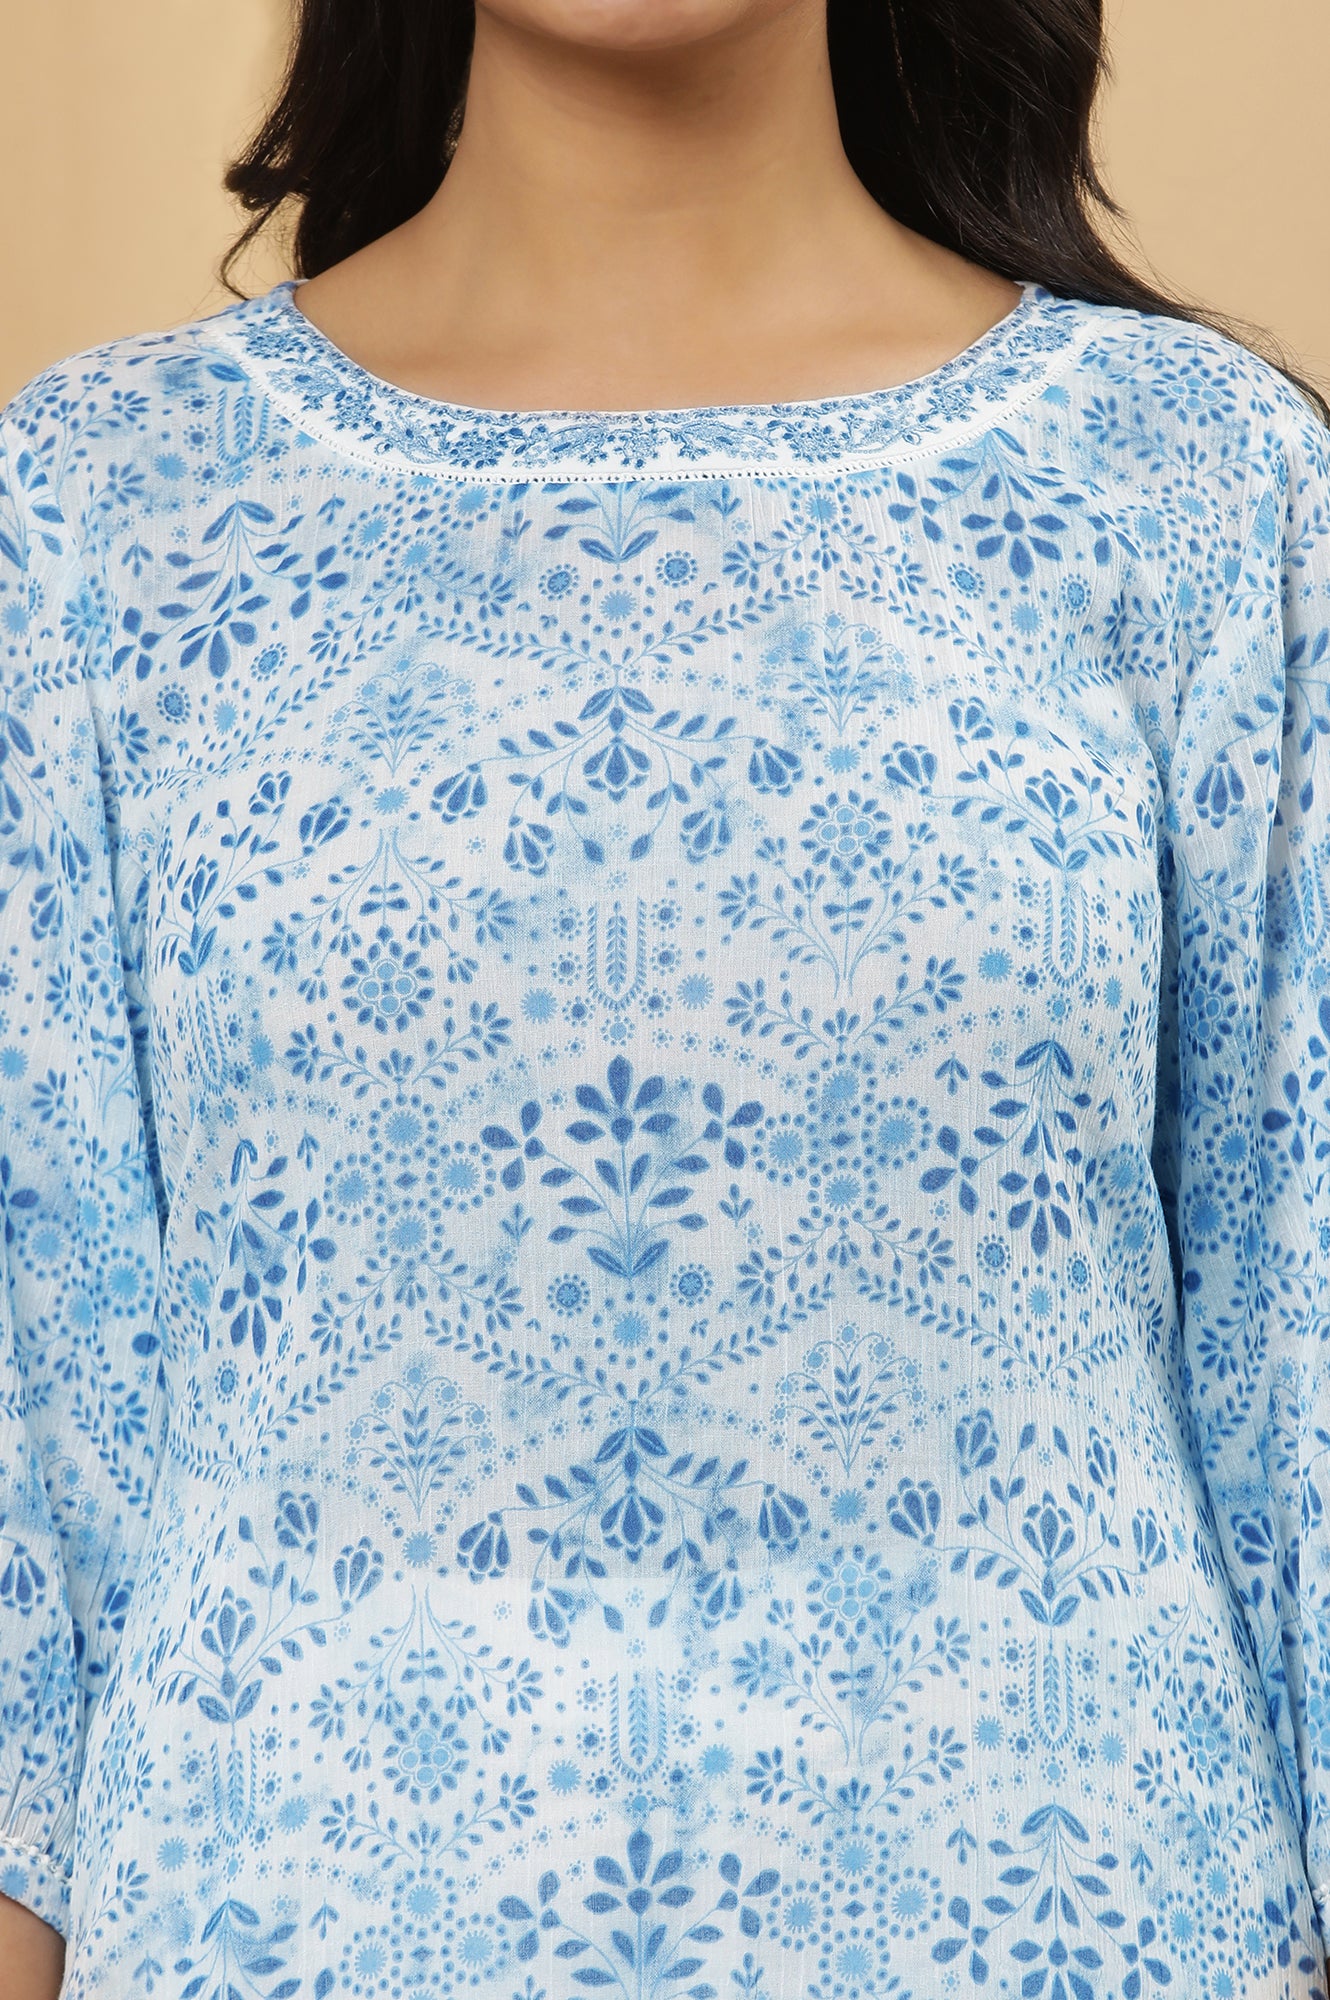 White And Blue Floral Printed Cotton Kurta